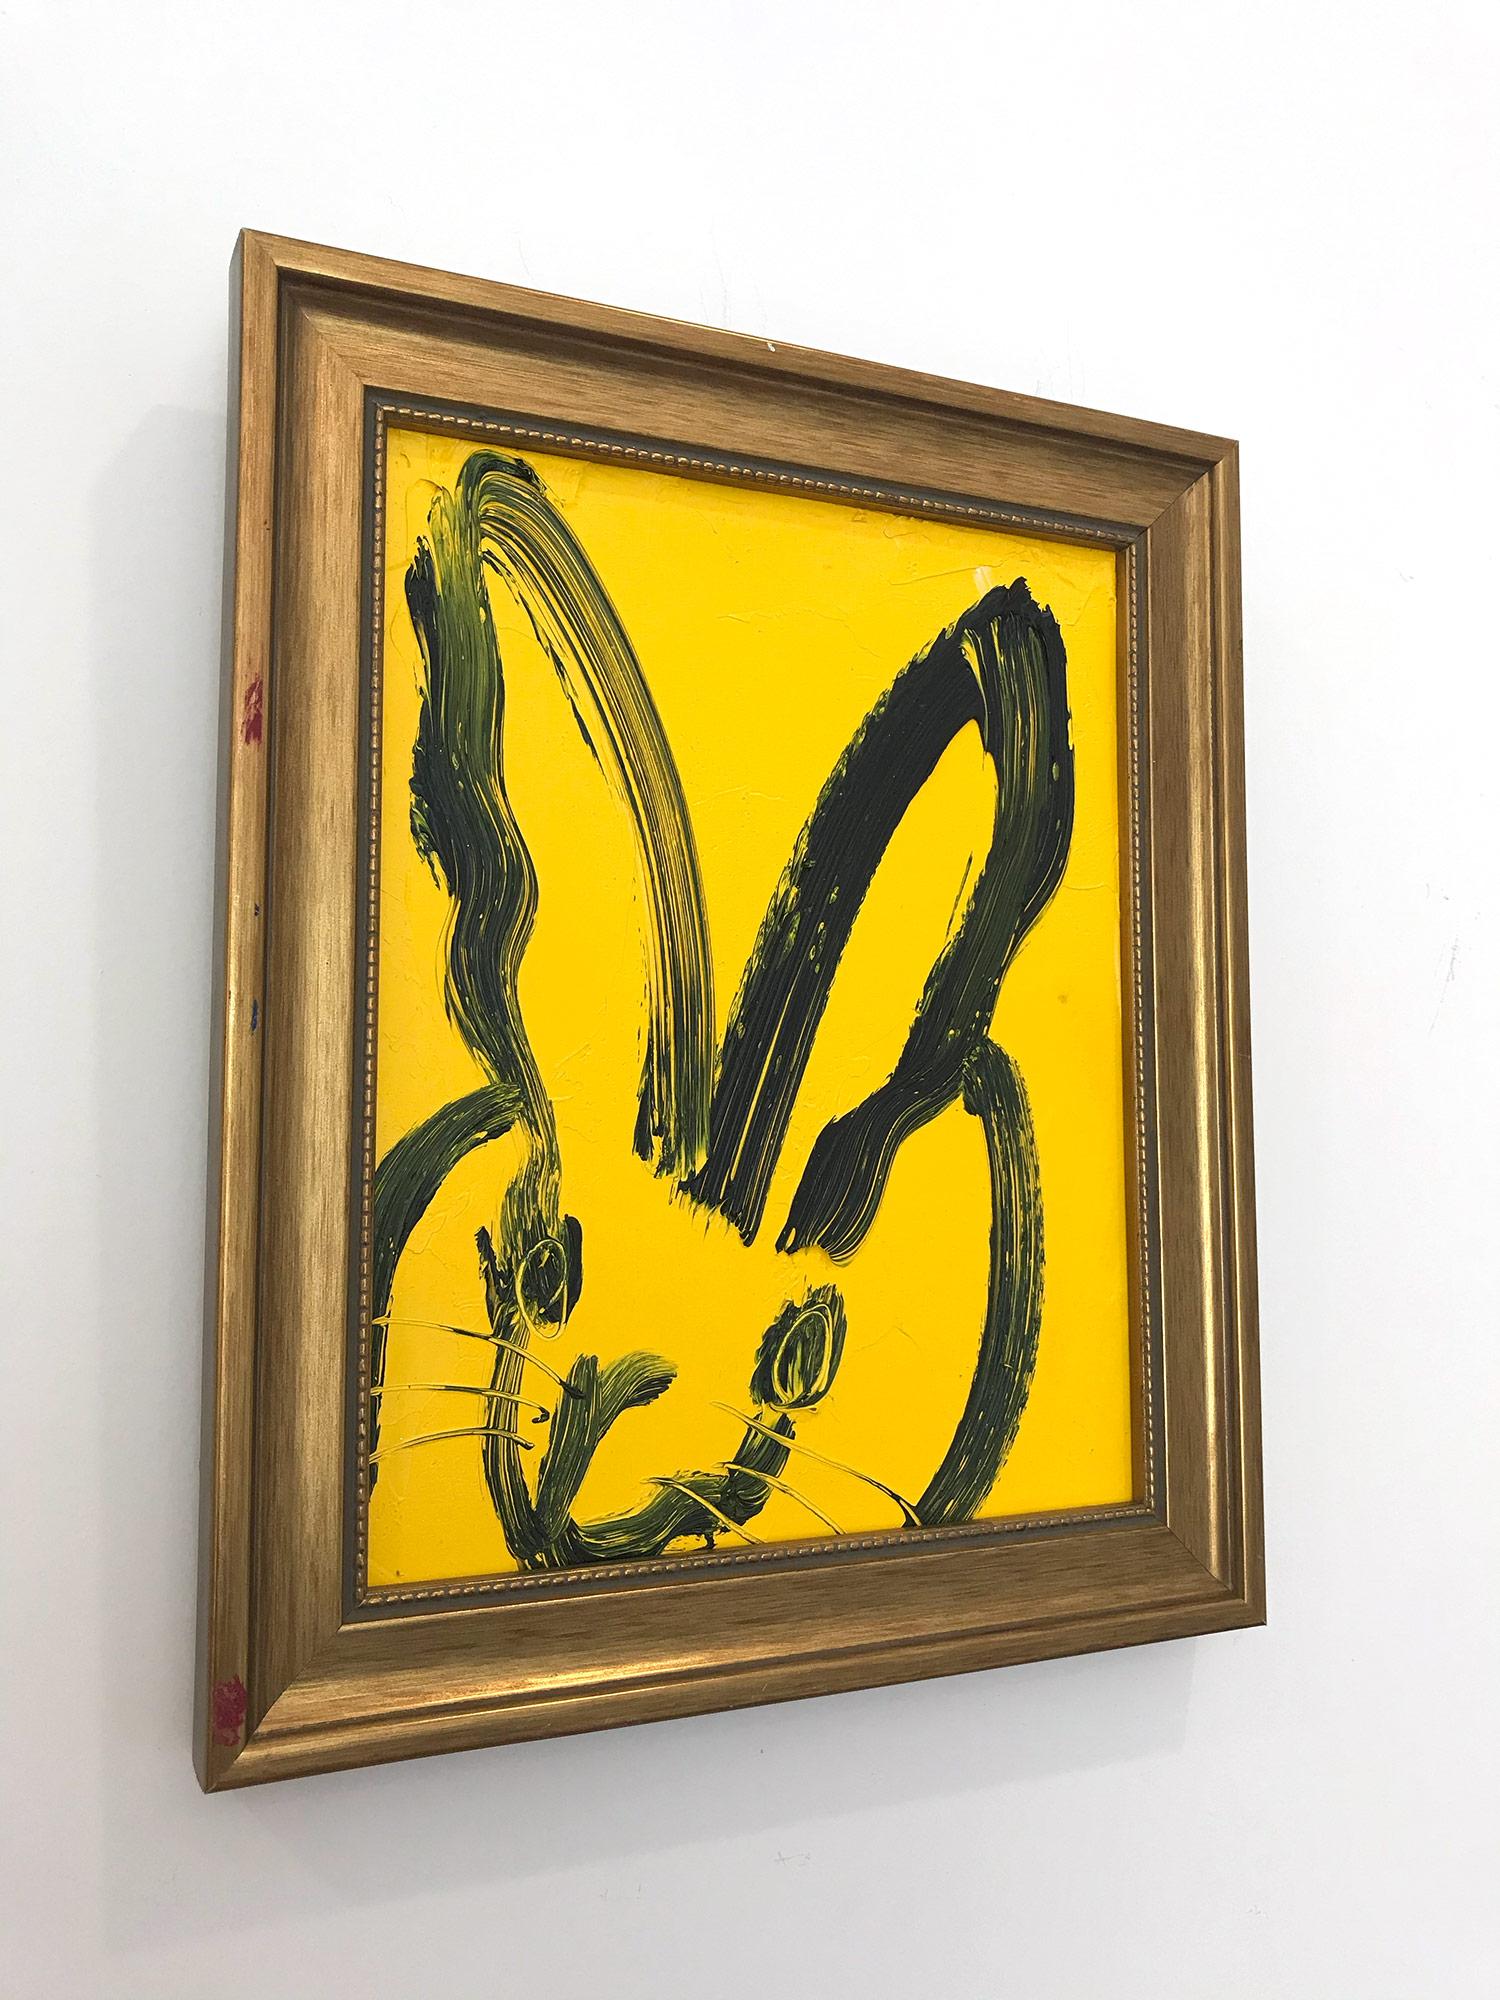 Untitled (Bunny on Royal Yellow) Oil Painting on Wood Panel 1